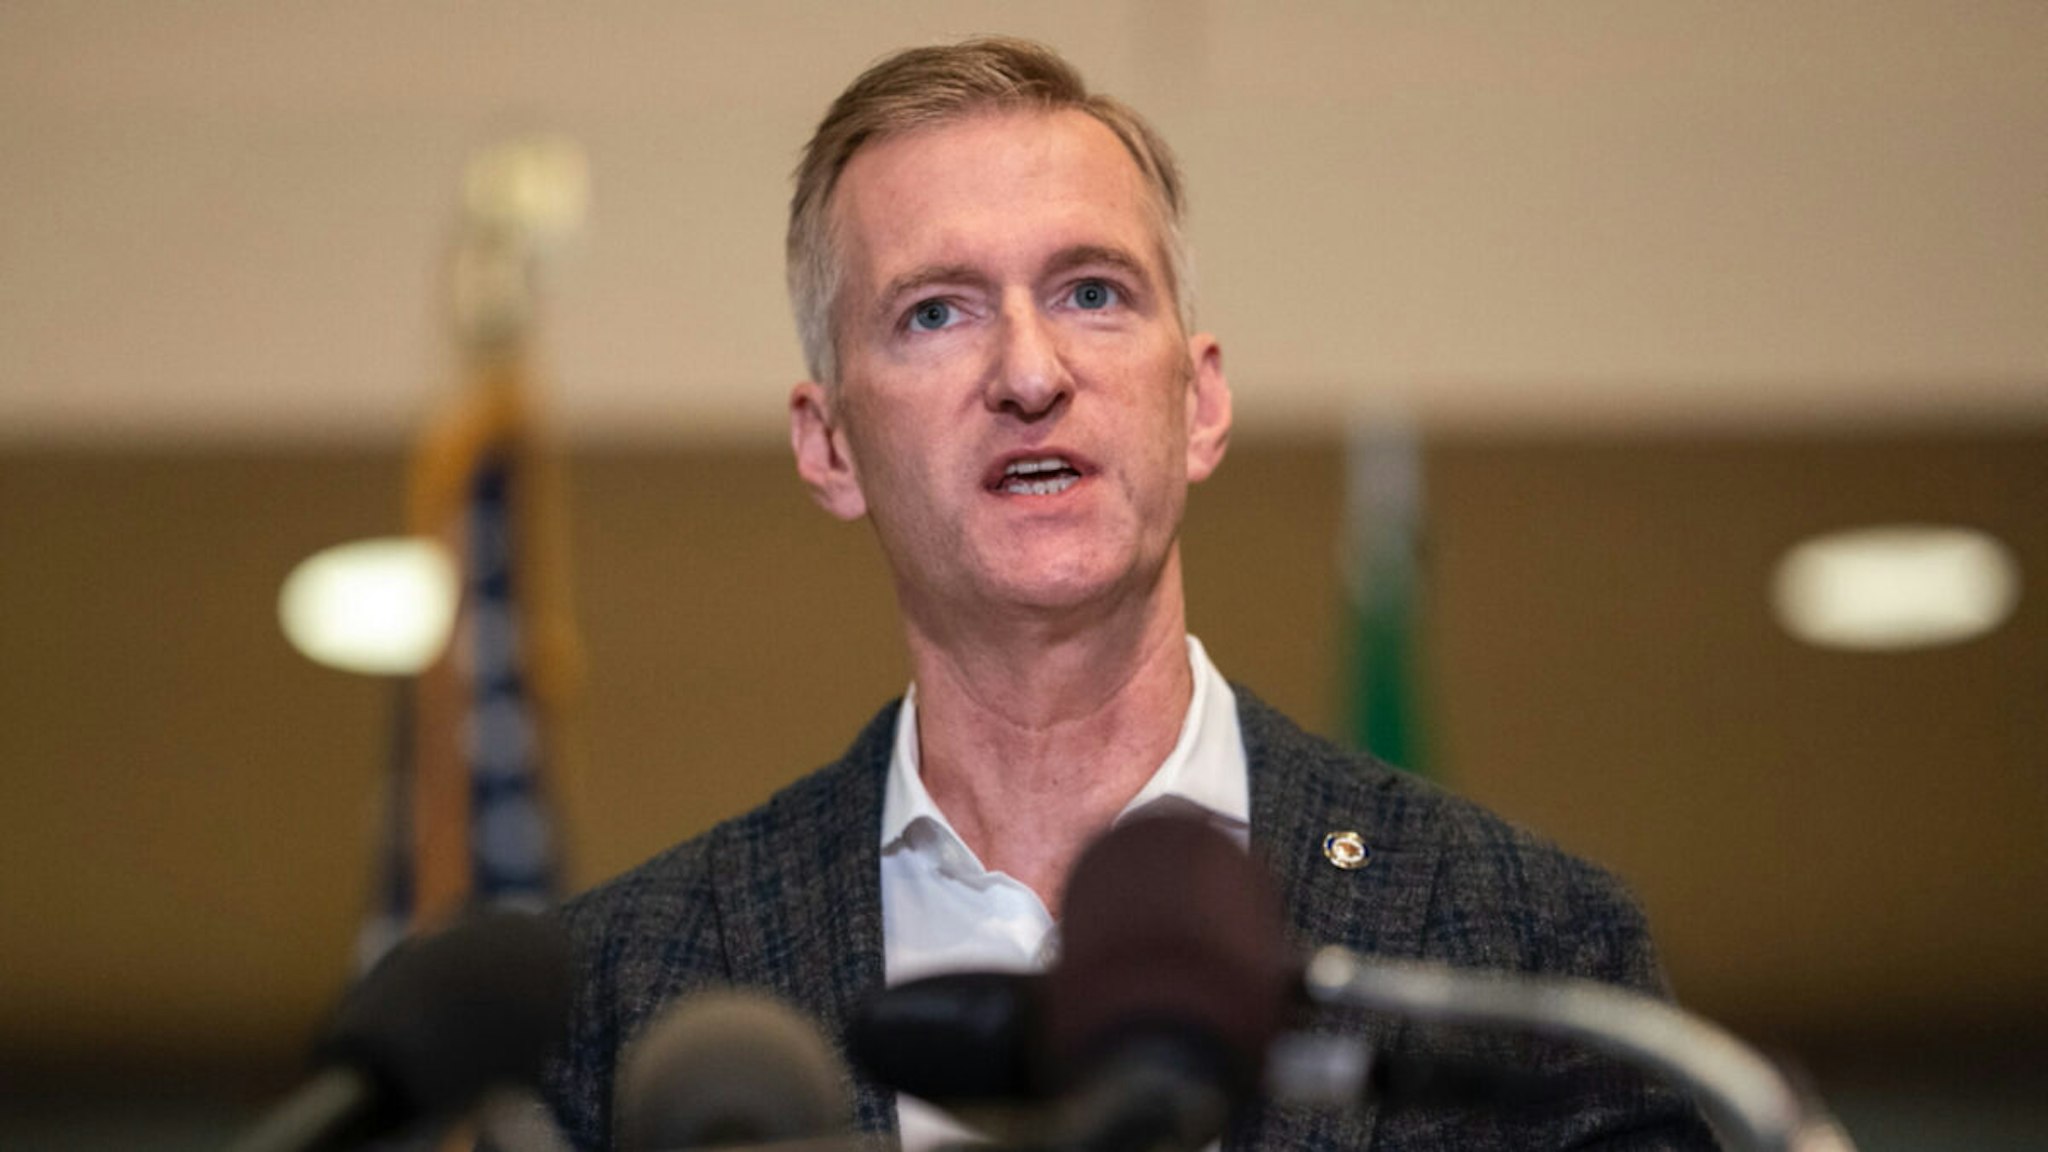 Portland Mayor Ted Wheeler speaks to the media at City Hall on August 30, 2020 in Portland, Oregon.